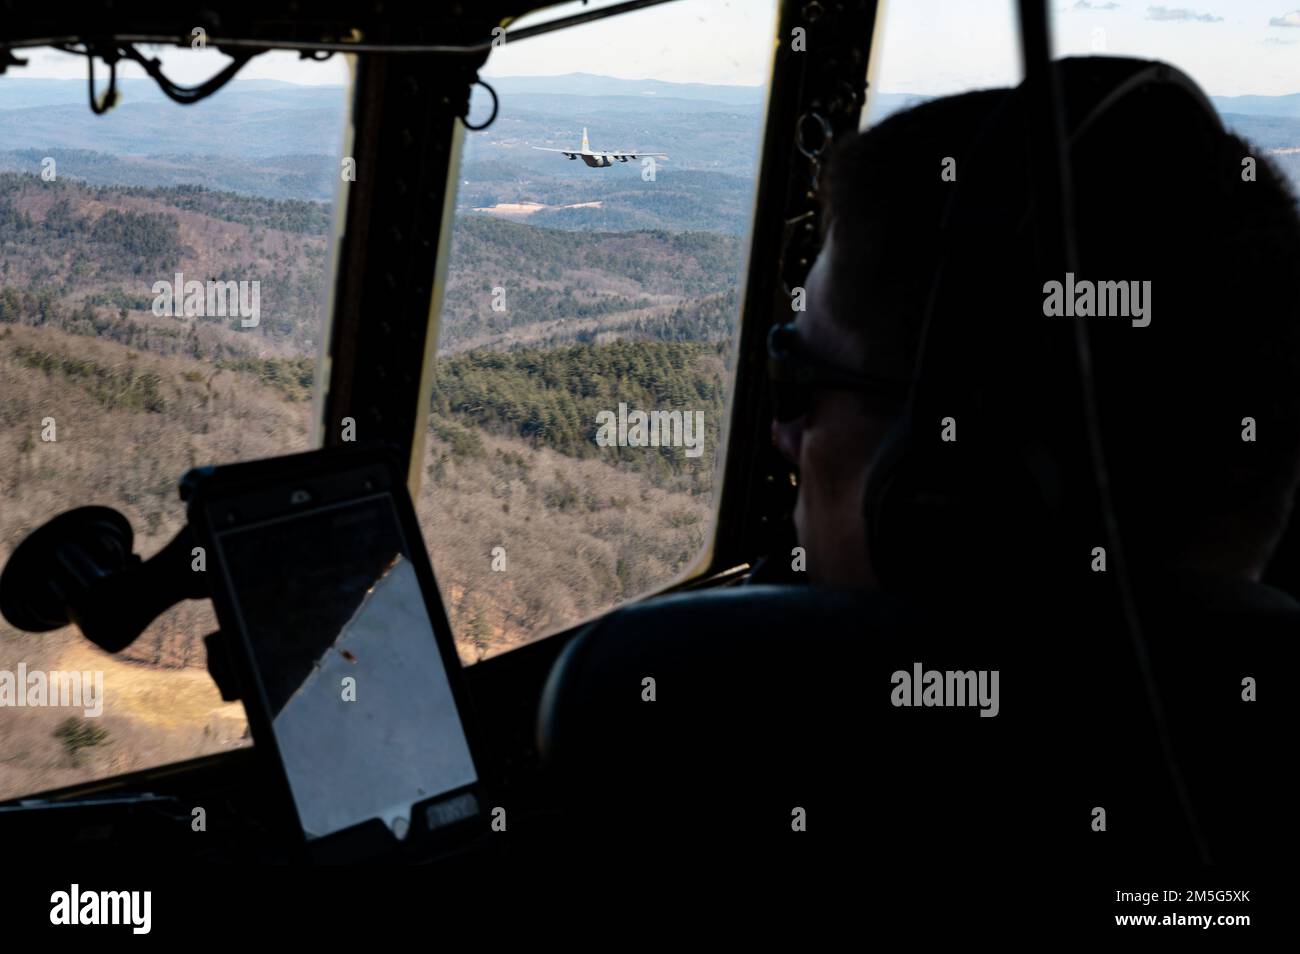 Air Force Lt. Col. Joshua Panis, a pilot assigned to the 103rd Airlift Wing, pilots a C-130H aircraft during an airdrop training mission, March 17, 2022, East Granby, Conn. Airdrops are used to expeditiously deliver vital assets. Stock Photo